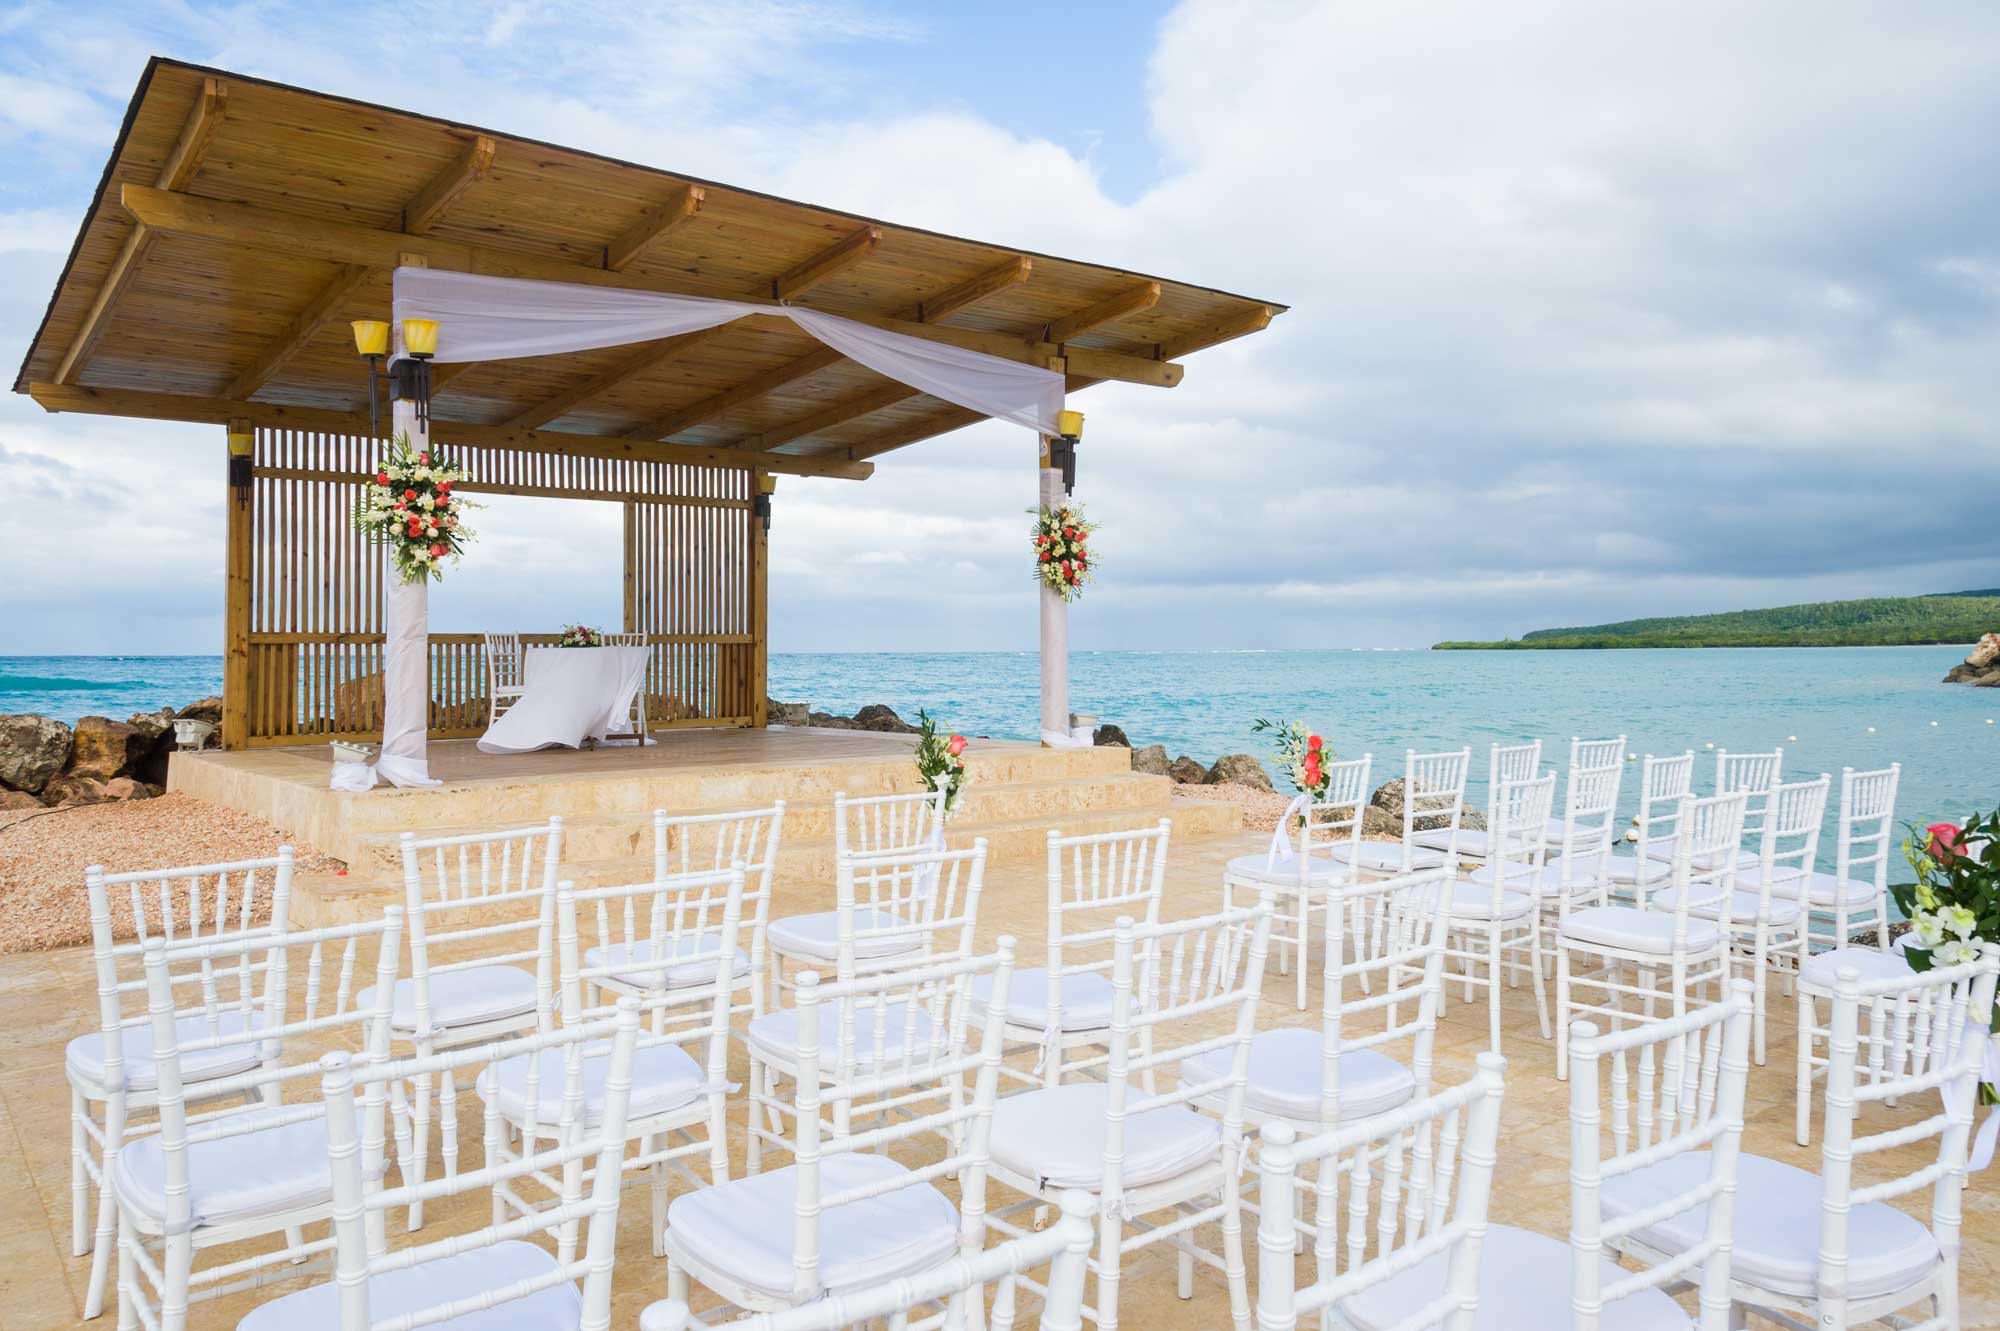 38 Wedding Venues You Have to See | Royalton White Sands Luxury Resort, Jamaica